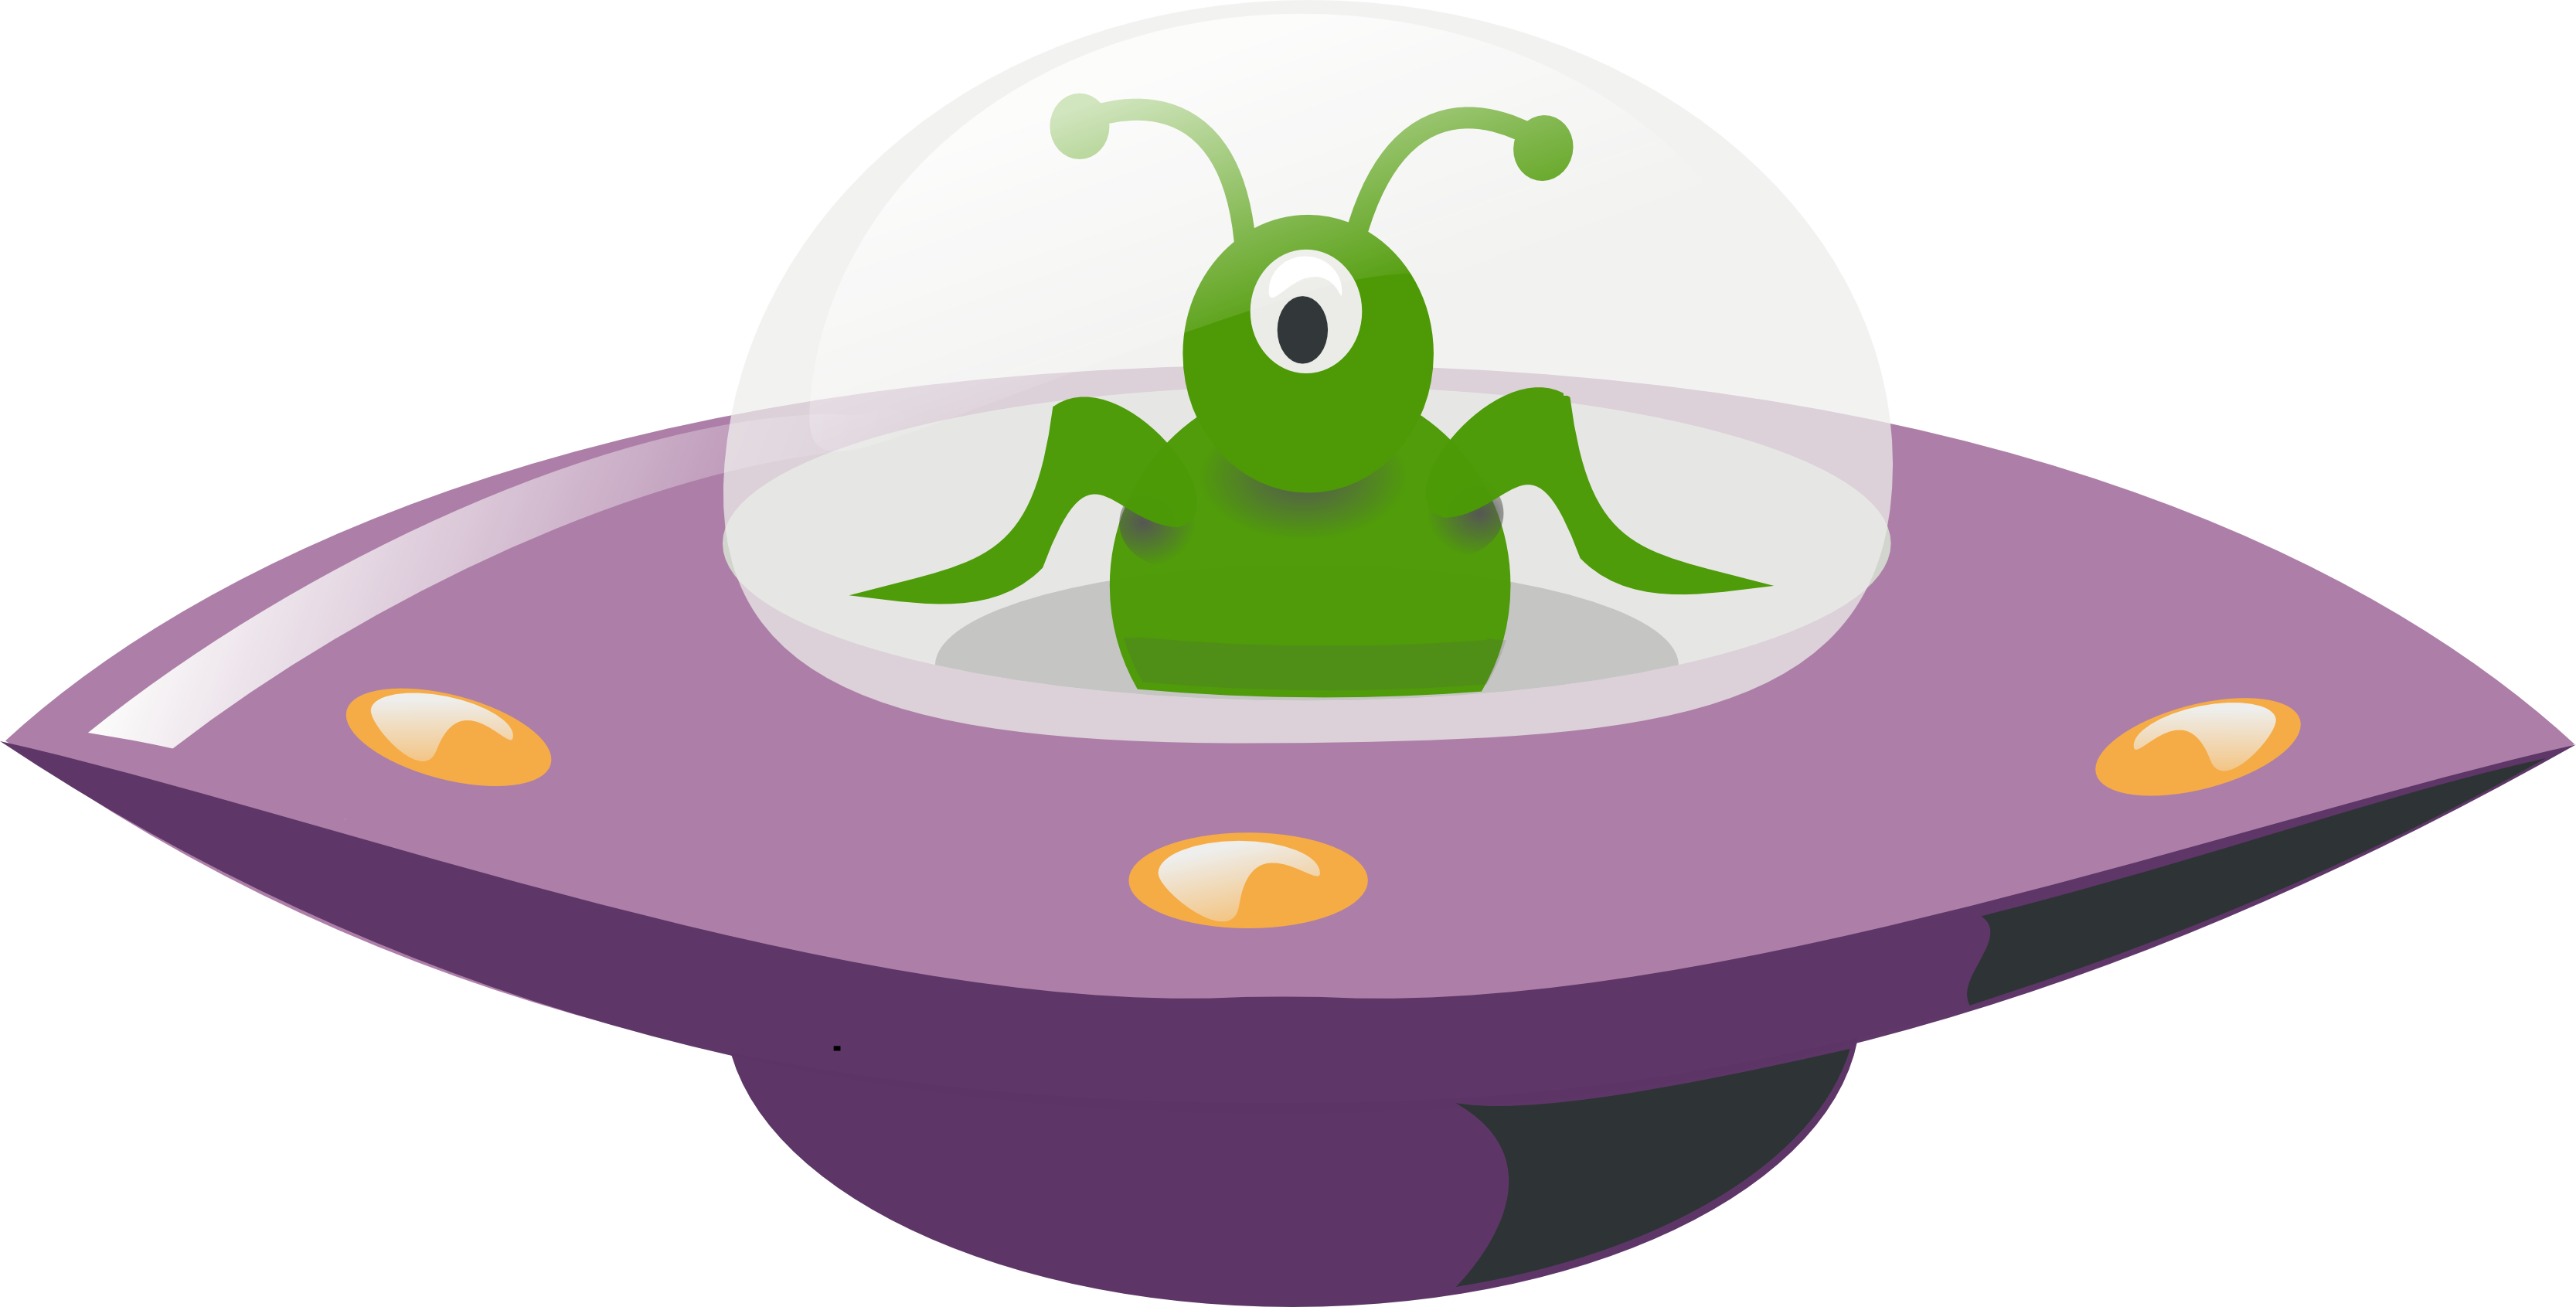 Free ufo clipart images - ClipartFox